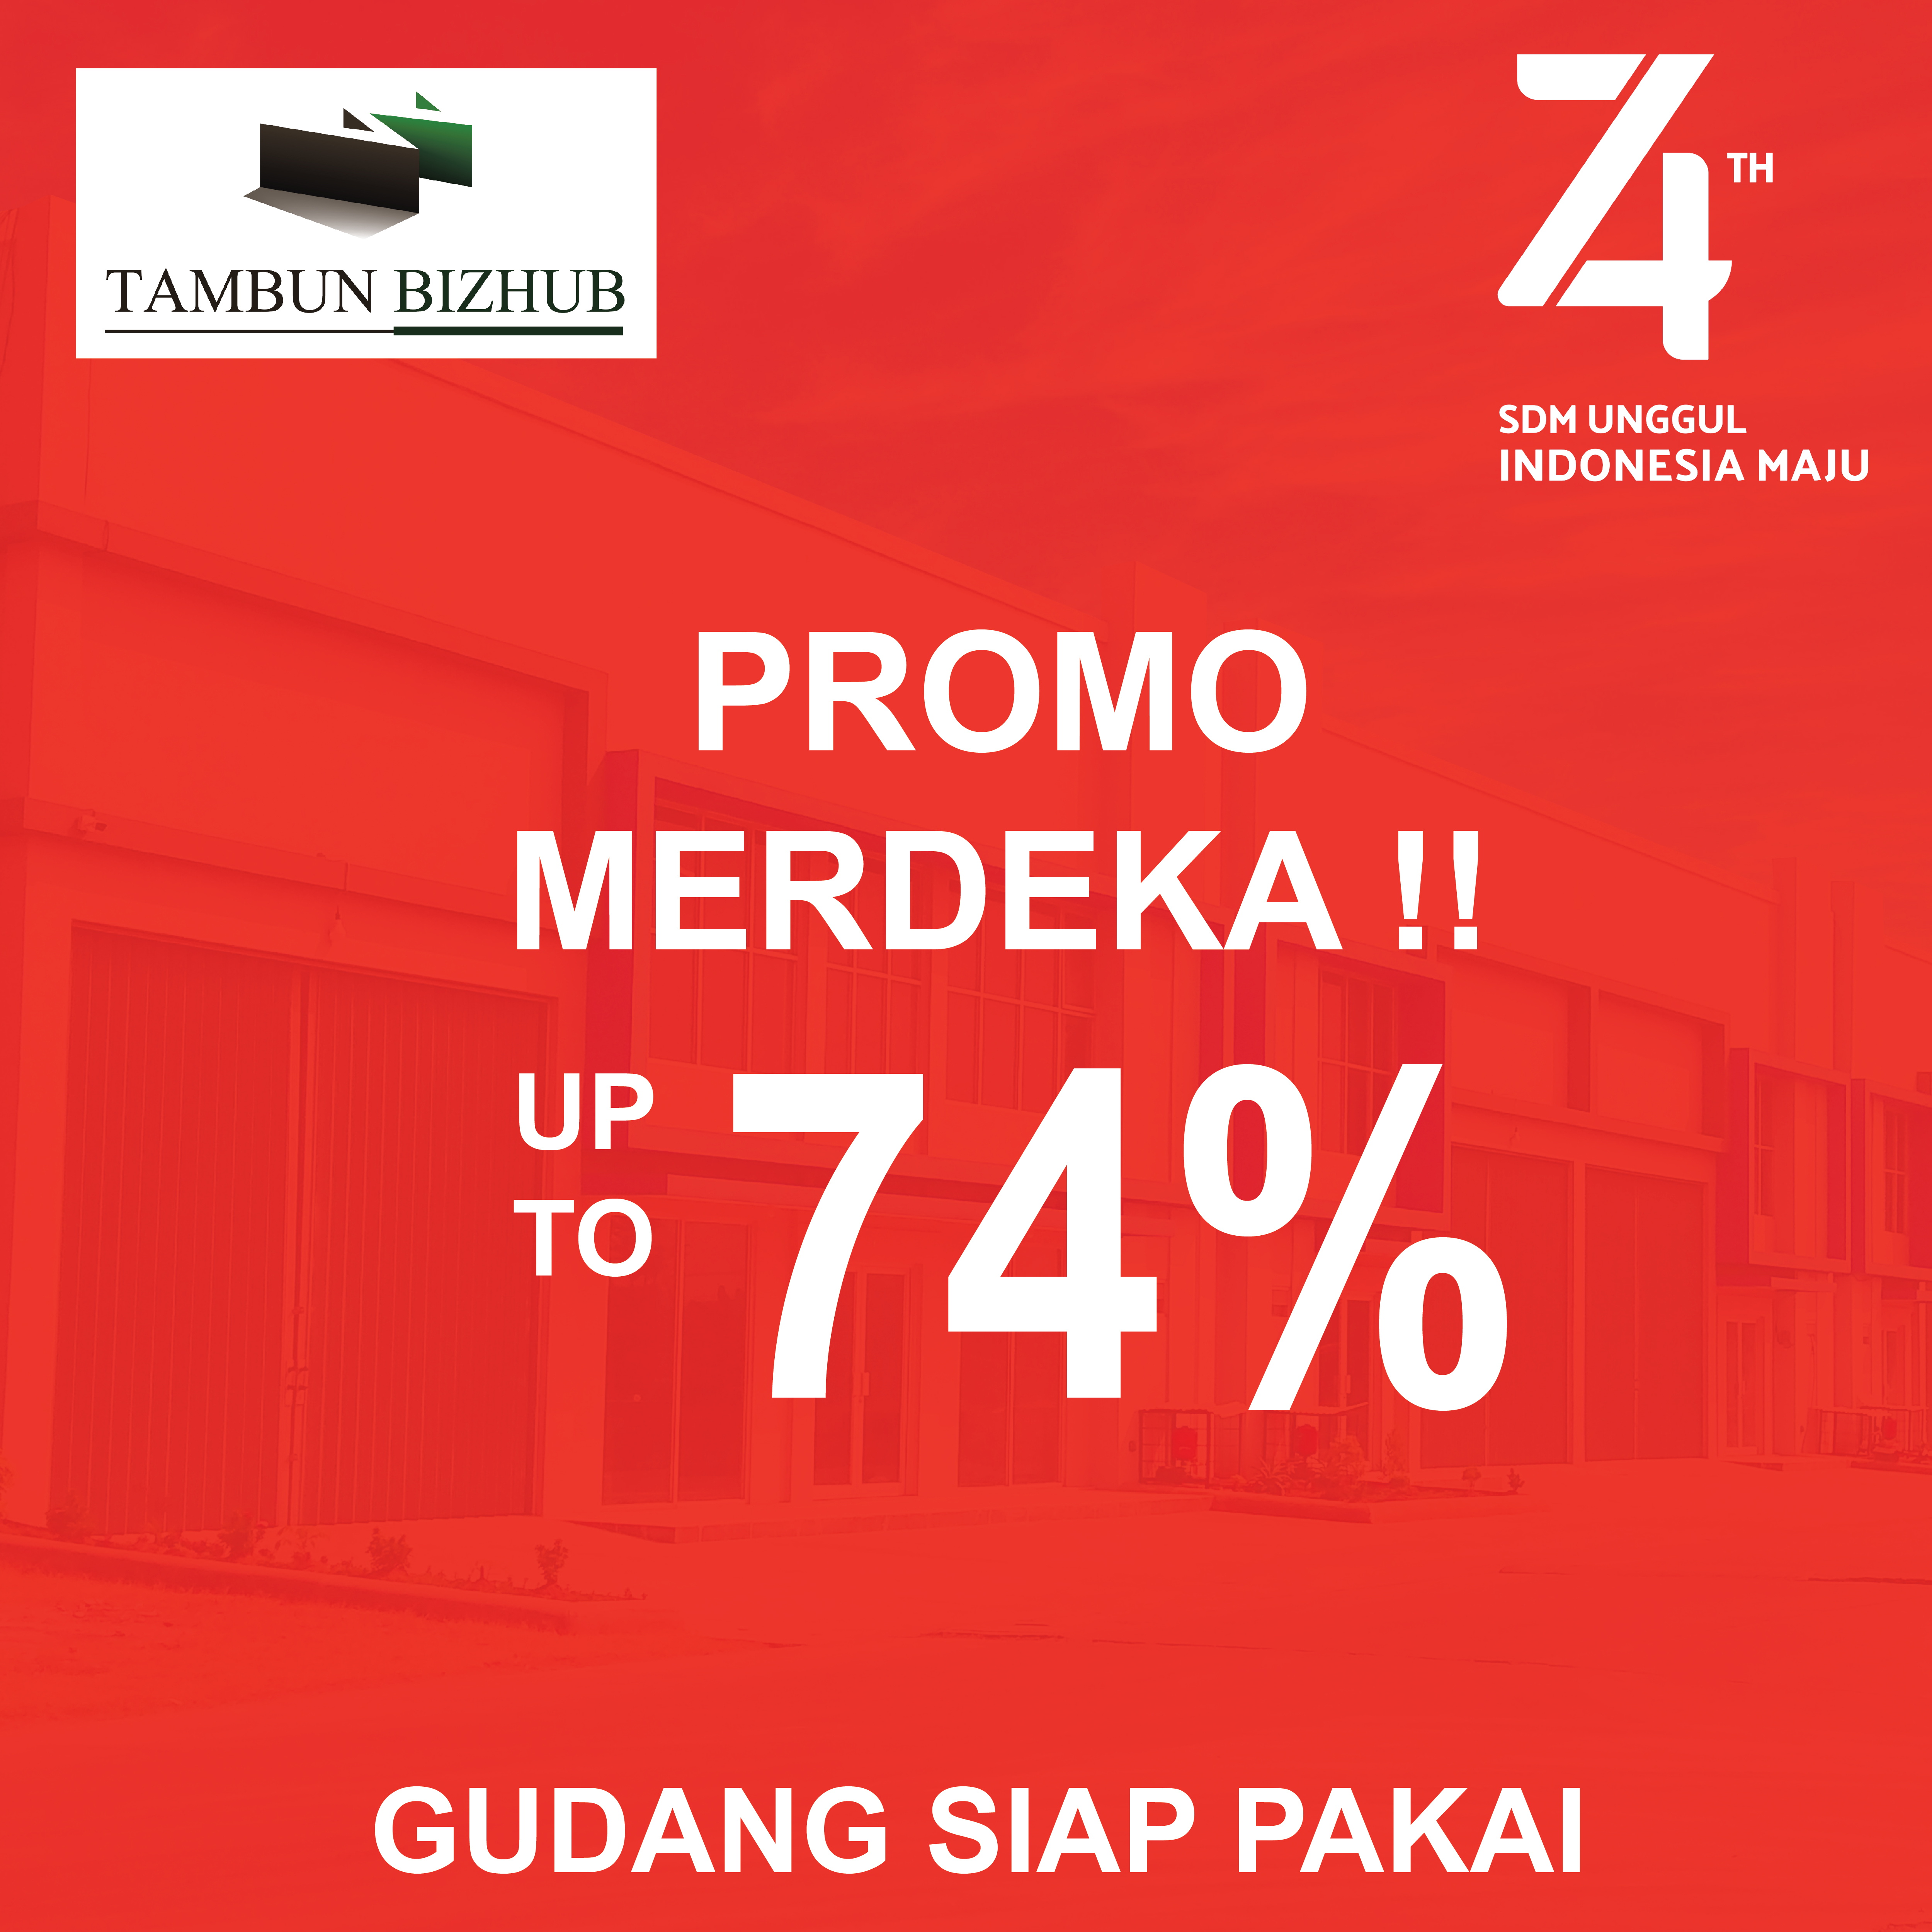 PROMO UP TO 74%